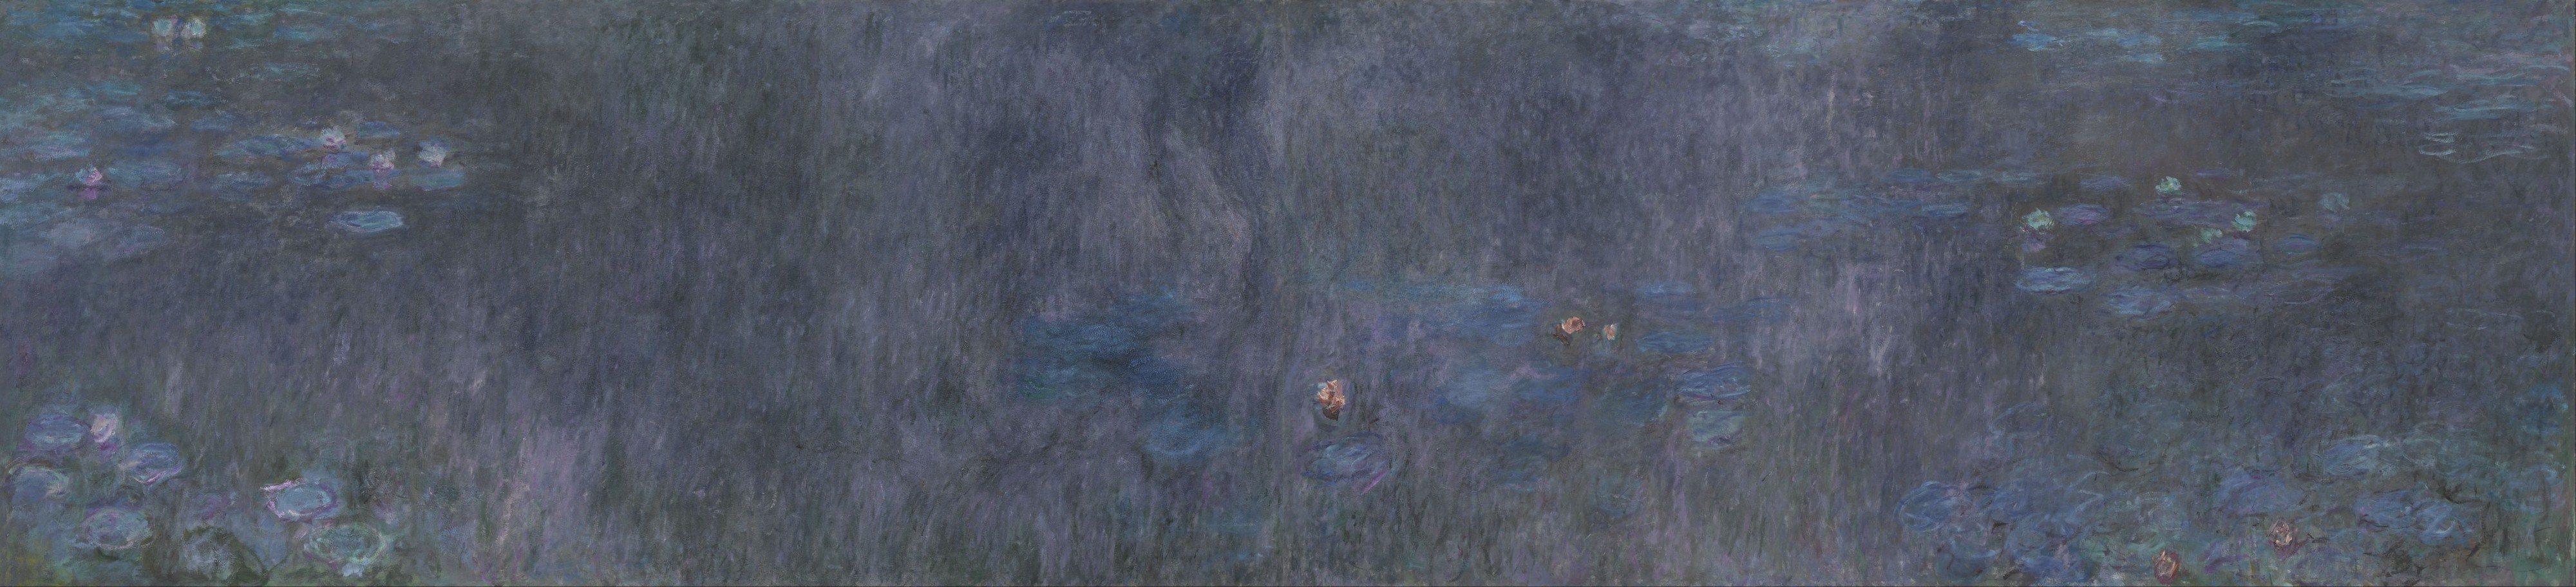 Claude Monet - The Water Lilies - Tree Reflections - Google Art Project